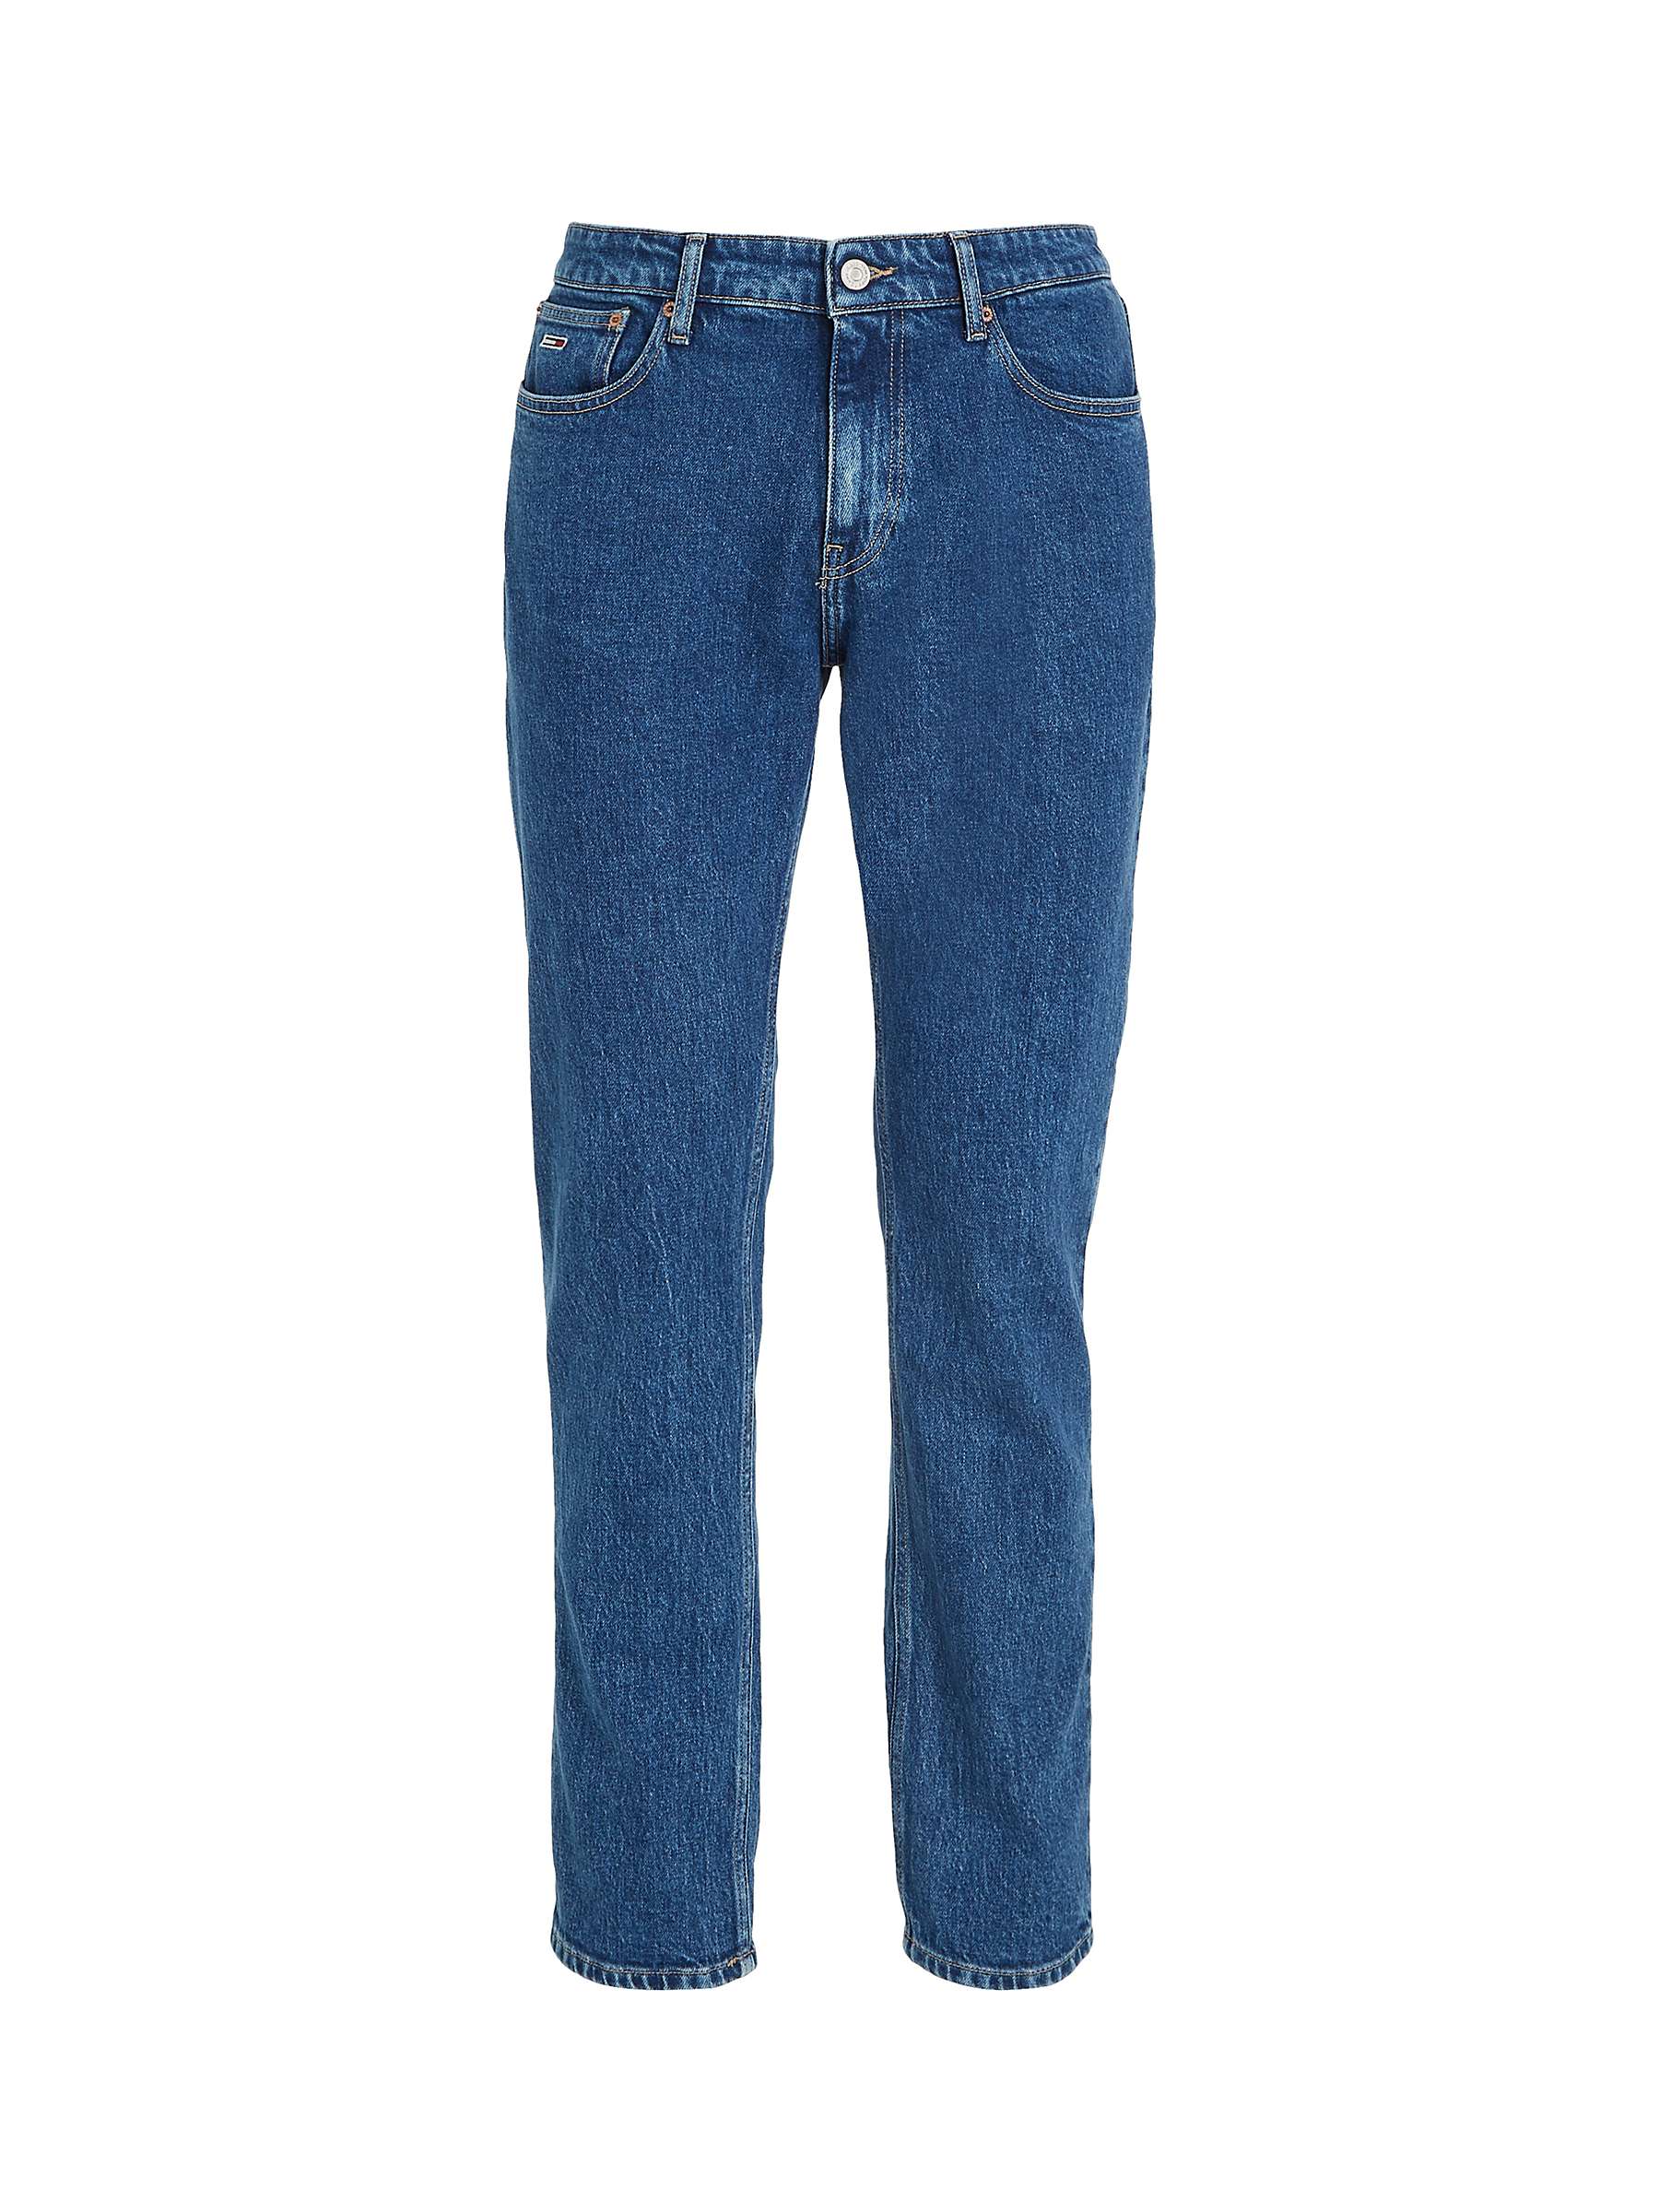 Buy Tommy Jeans Ryan Straight Jeans Online at johnlewis.com